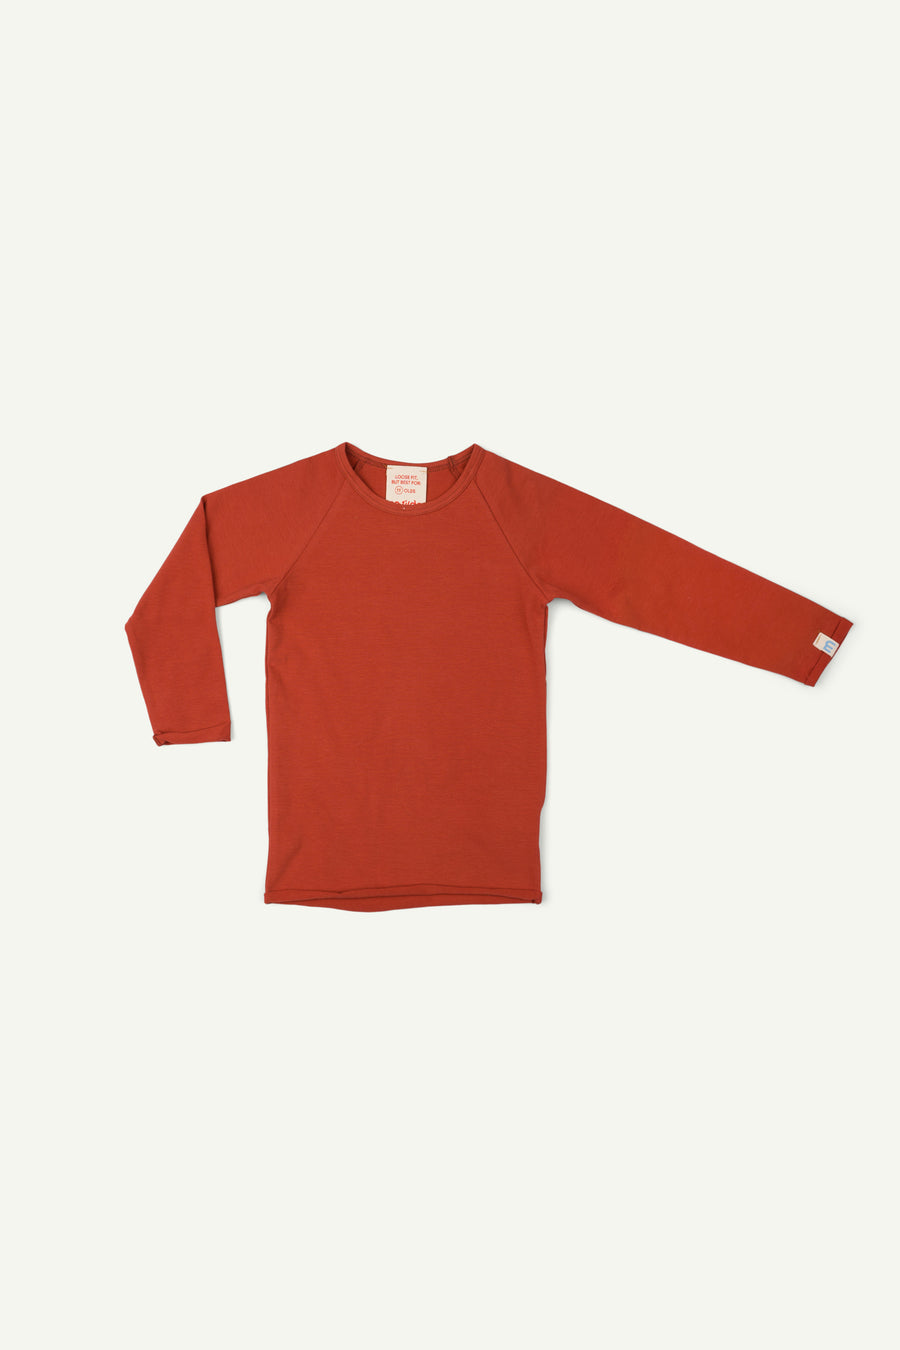 Red T's long sleeve